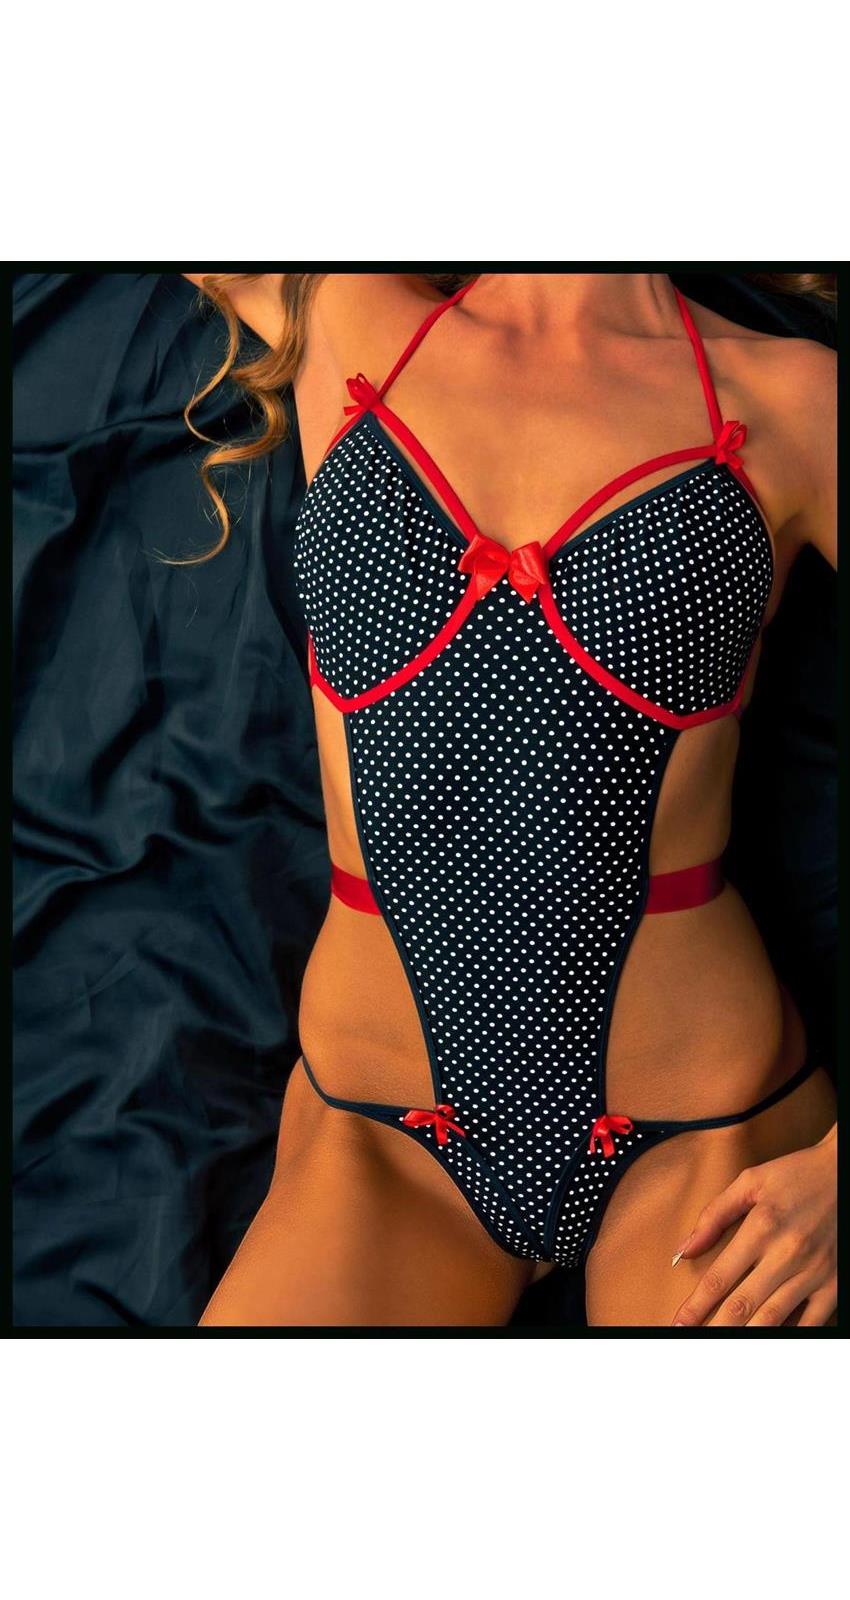 Fearless and Fun (FAF) Women's Polka Dot Body with Red Bows - Black/Red/White - One size for Valentines Day